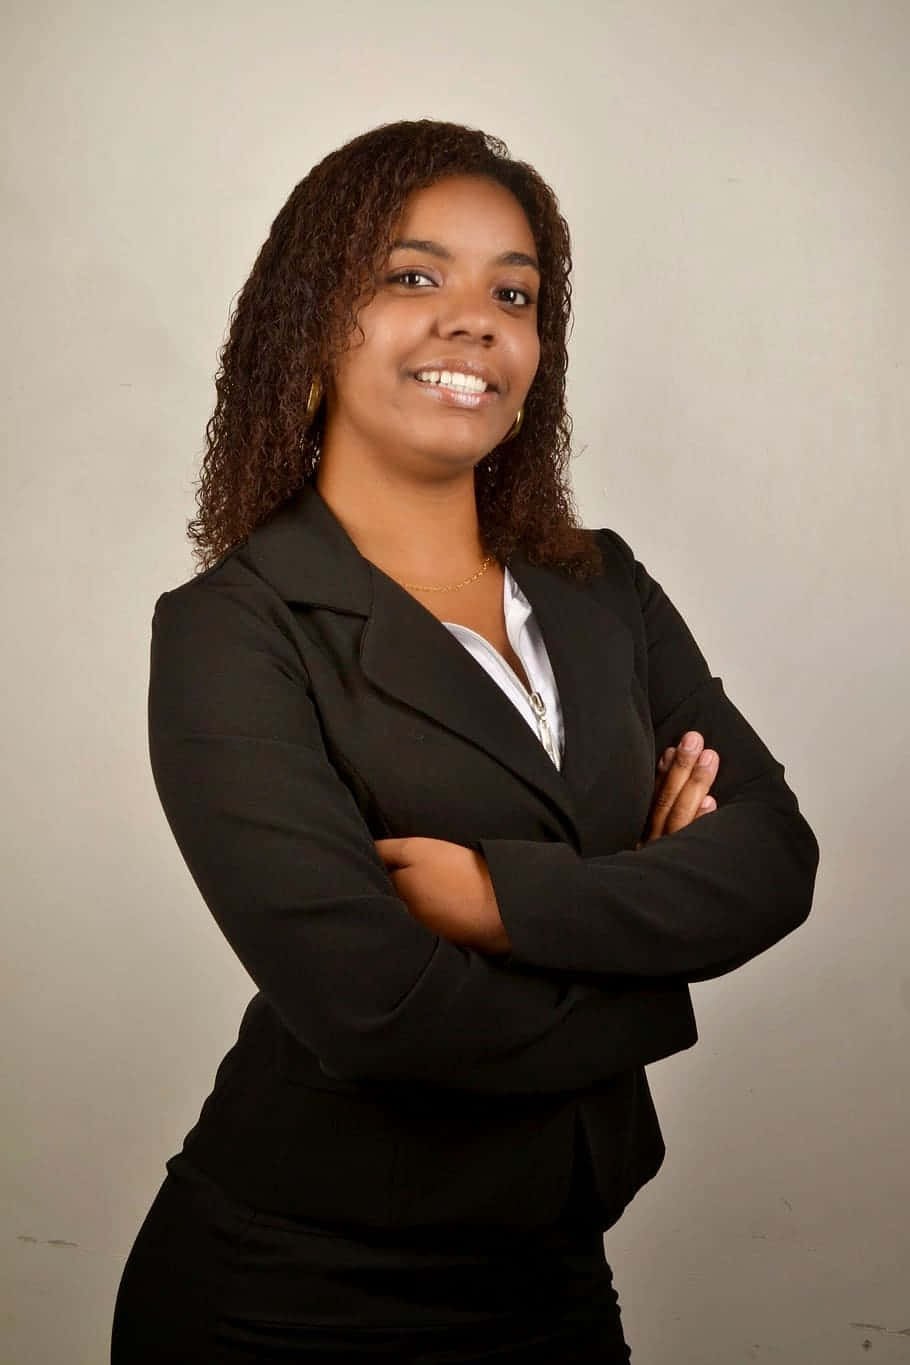 Young Black Woman Smile In Business Suit Wallpaper